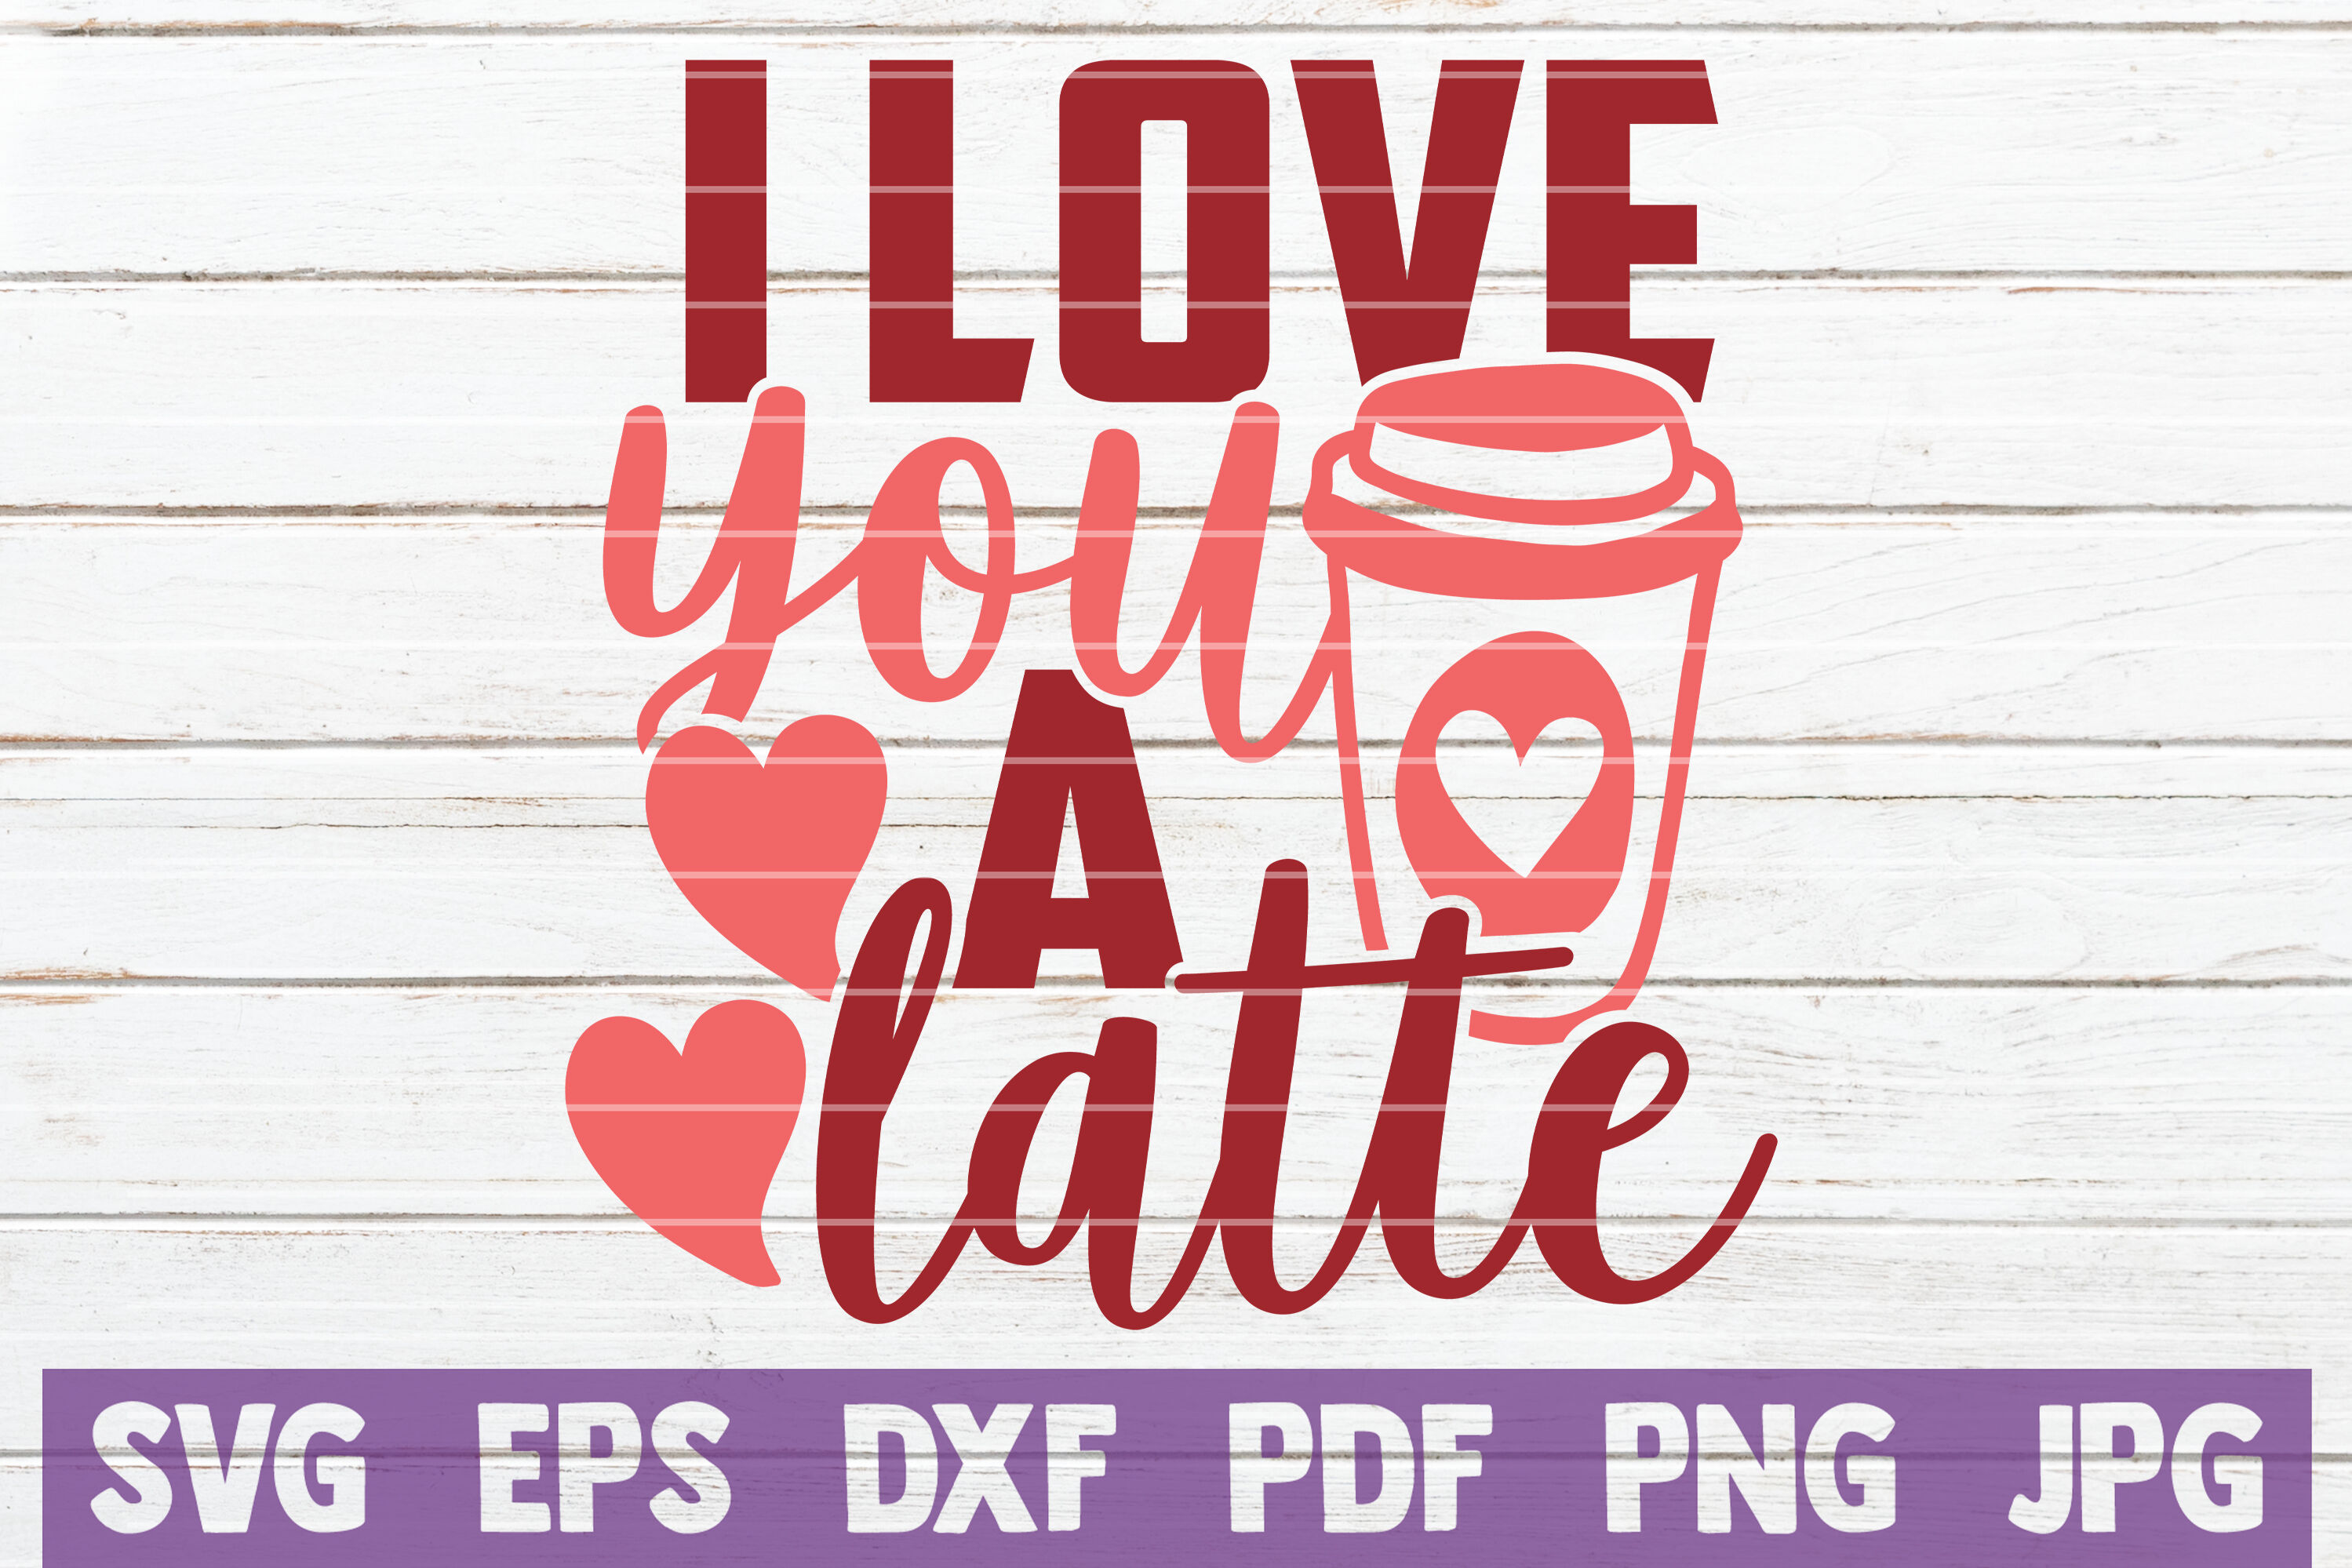 Download I Love You A Latte SVG Cut File By MintyMarshmallows ...